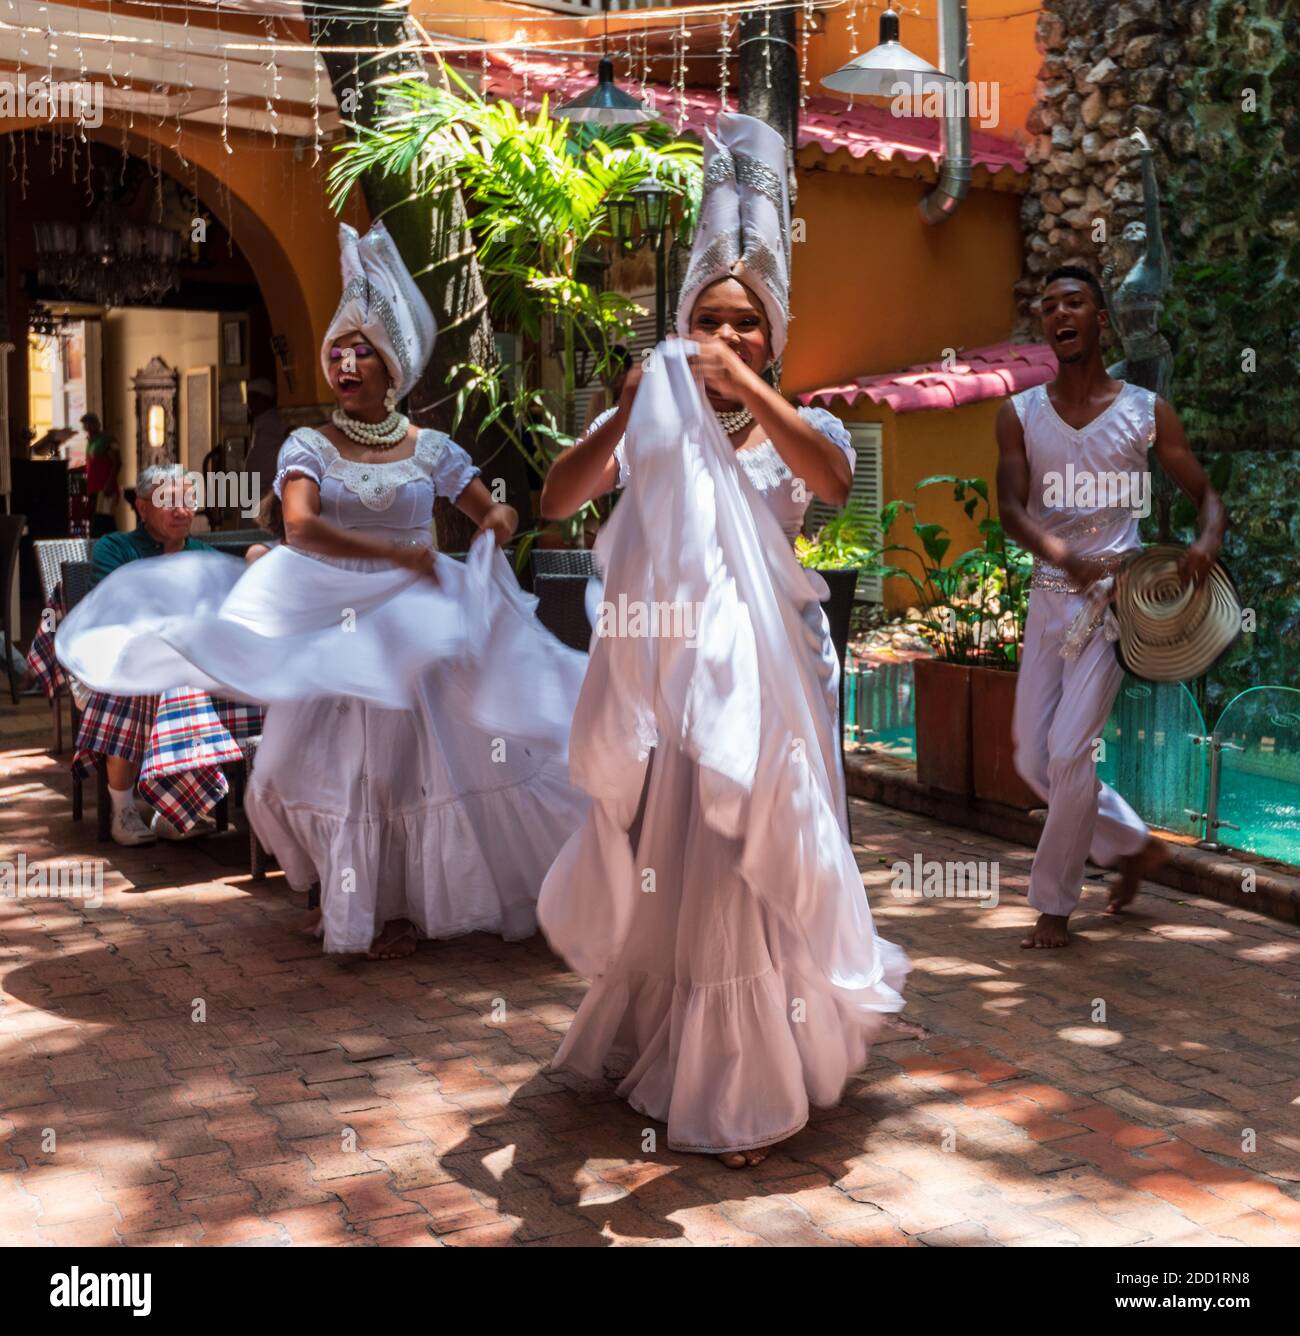 Cartagena, Colombia--April 21, 2018. Two women and a man perform a traditional dance in Caratgena, Columbia. Stock Photo